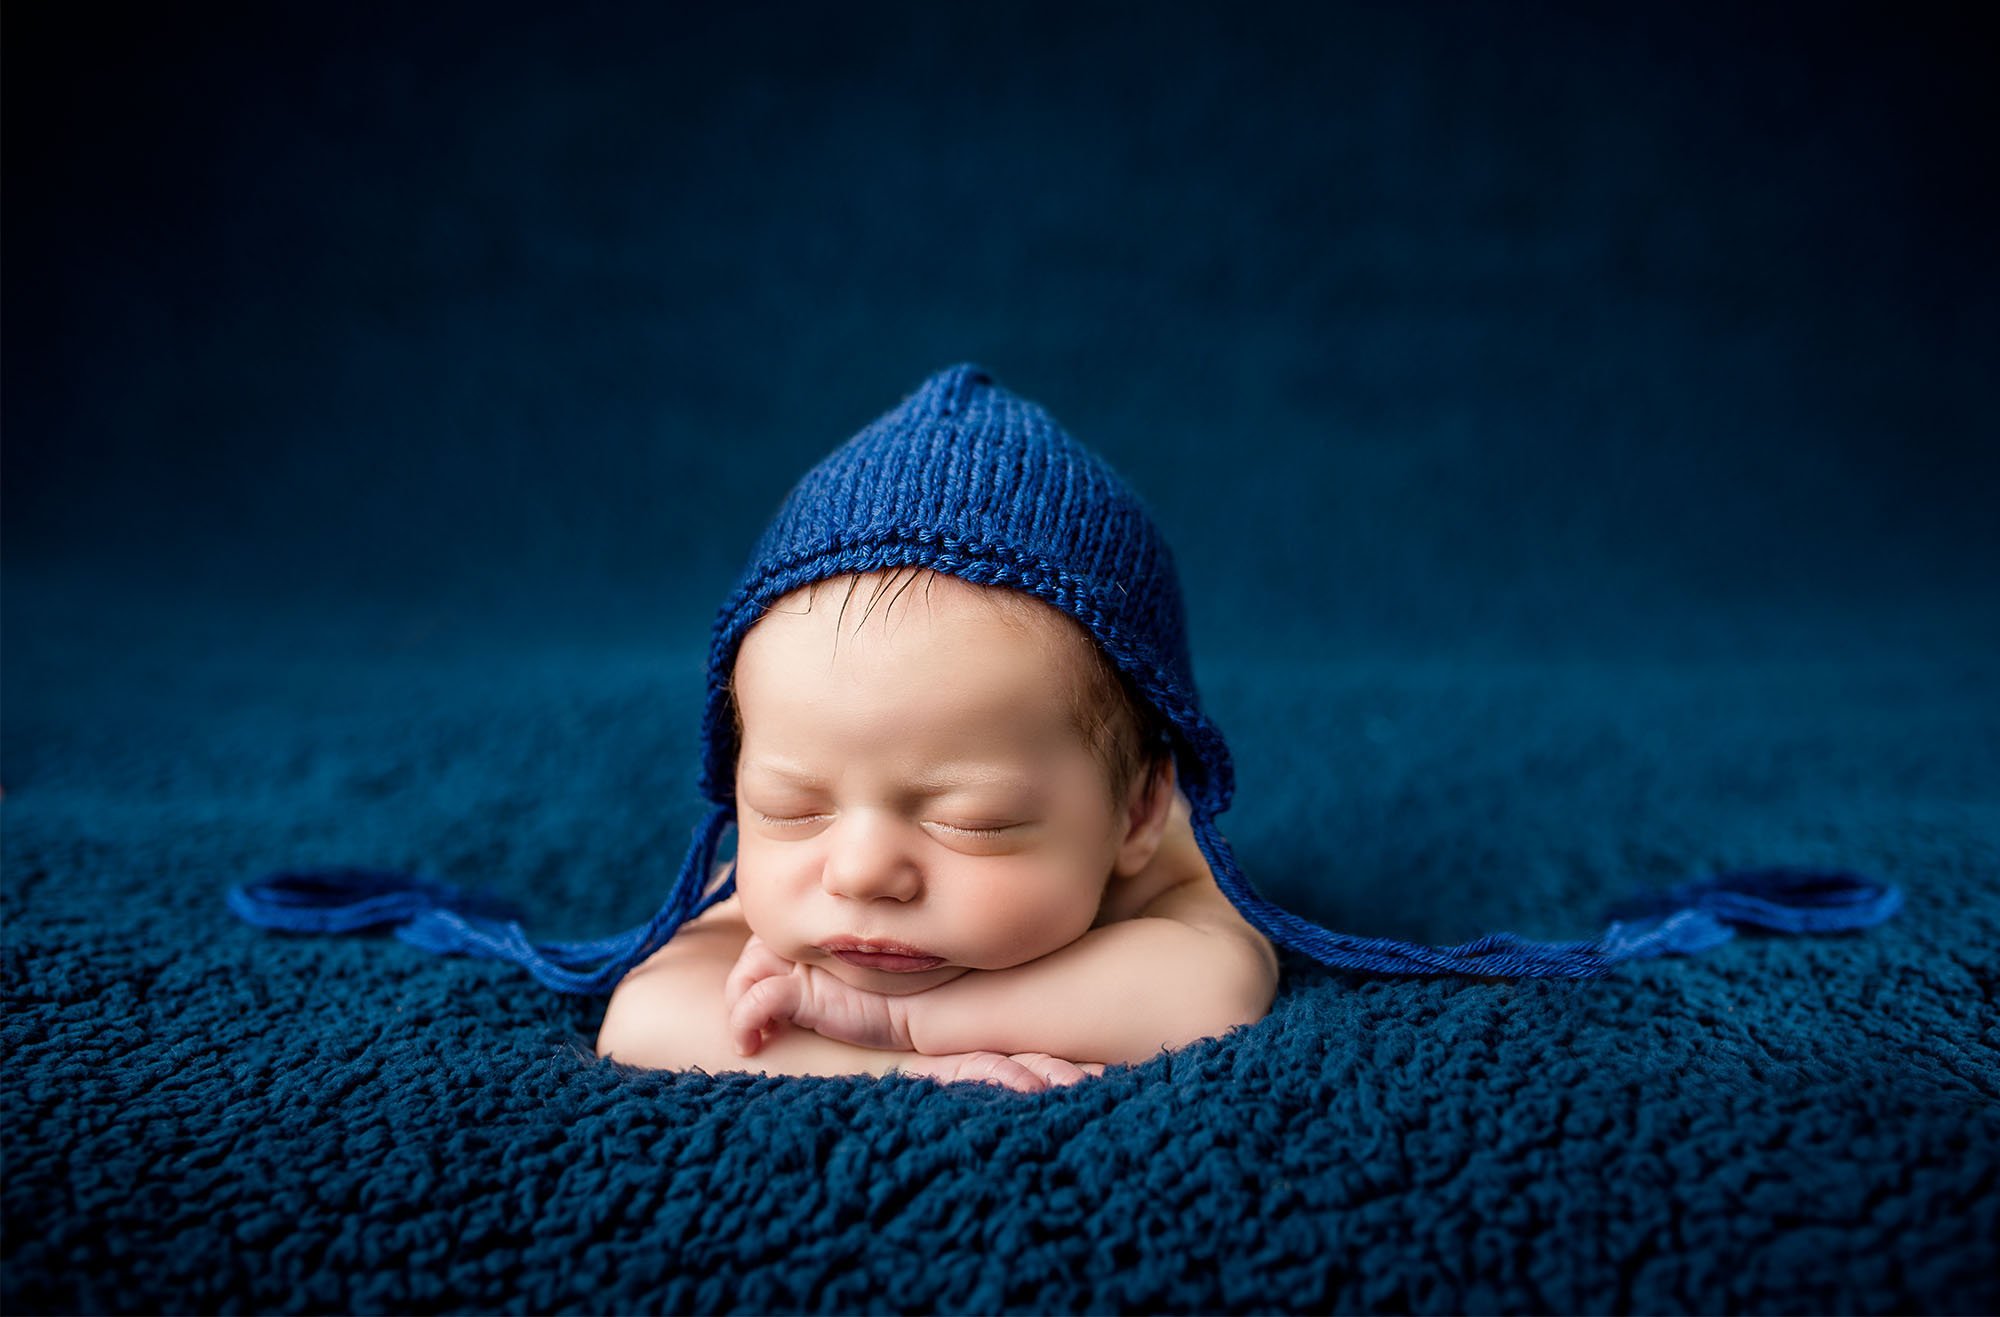 newborn baby boy sleeping on blue blanket with head on hands and blue knit cap